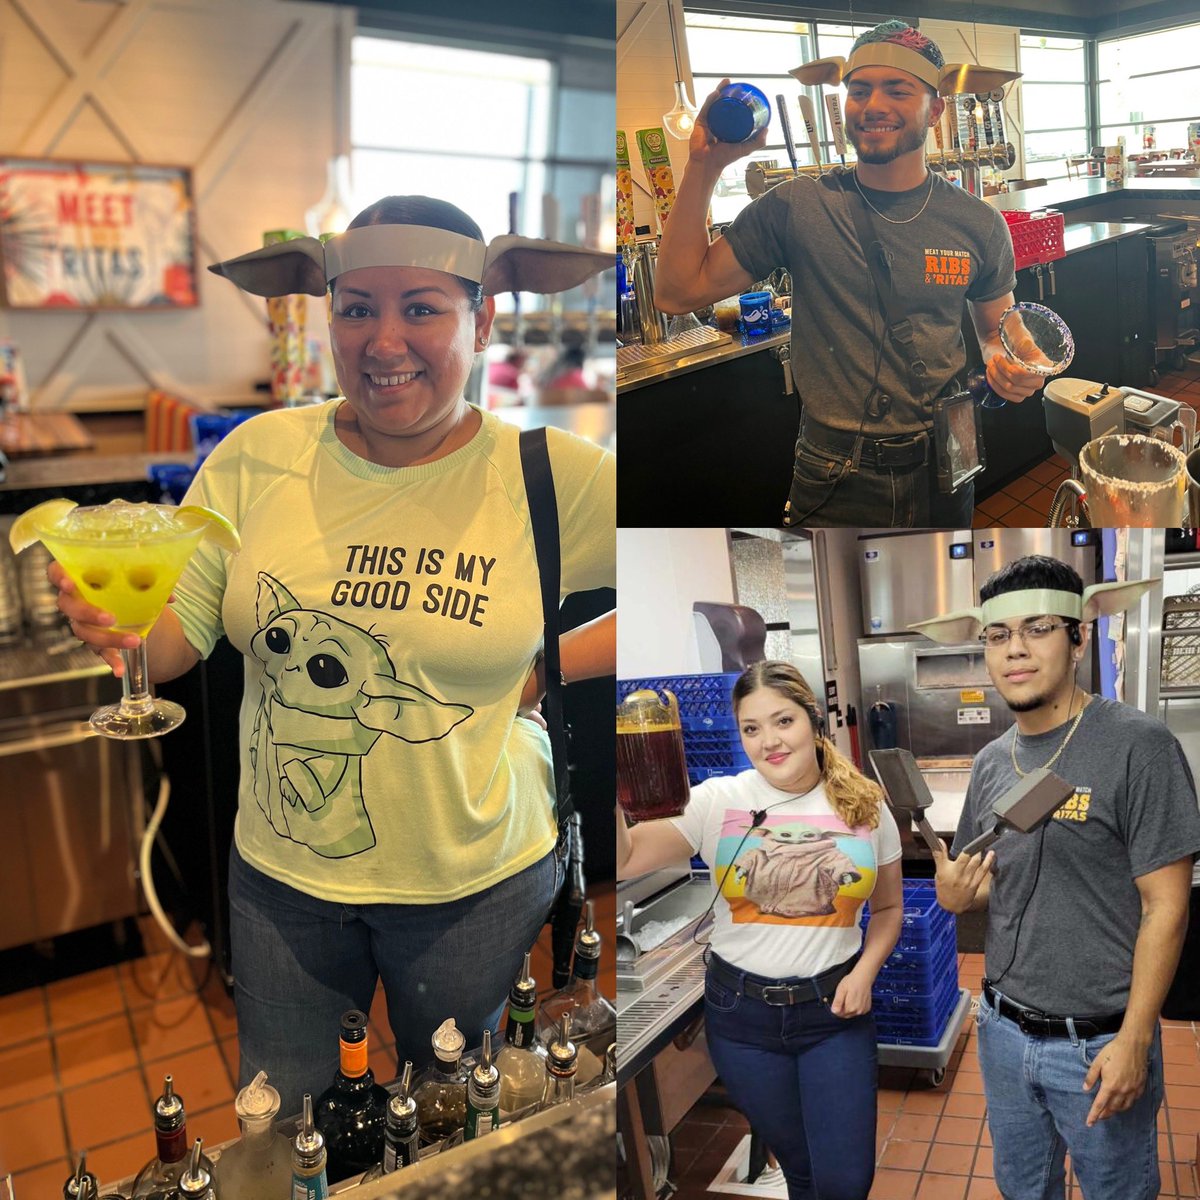 ✨ May the 4th be with you ✨ #chilislove #chilis1656 #JediKnights @LarryV71 @mikponce82 @vero_gee147 @ViriMunguia7 @rubywoo83 @JetJerry2408